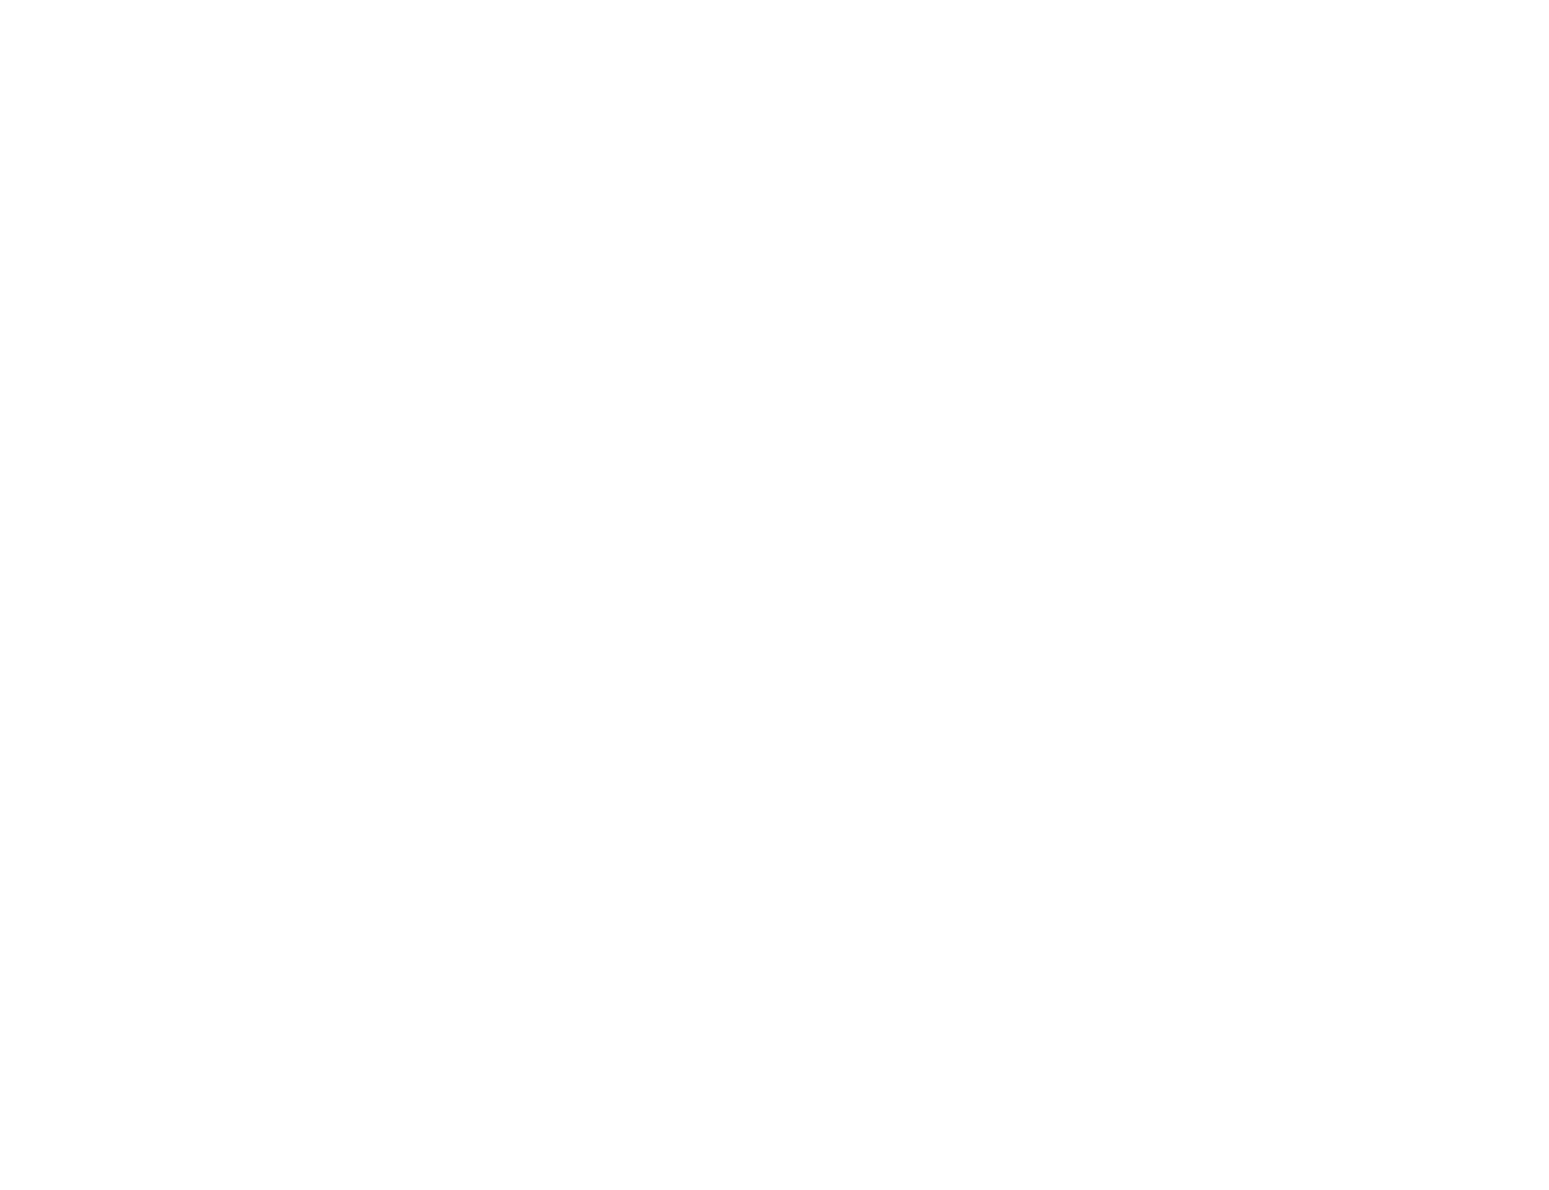 TennCare Drug and Alcohol Rehab Facility in Knoxville Stepping Stone to Recovery